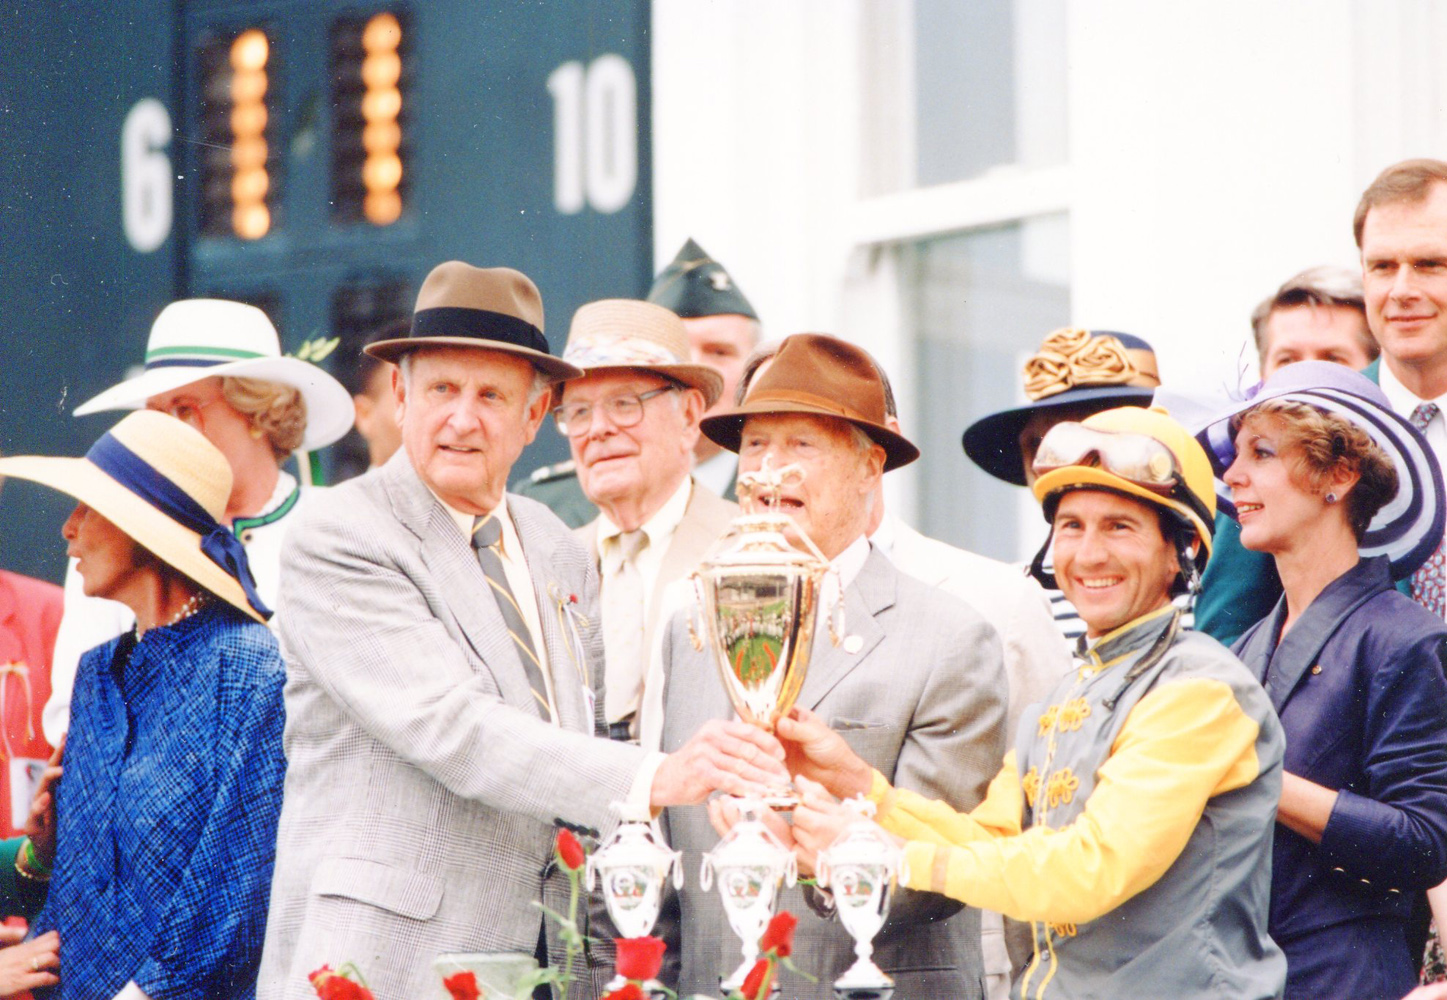 Mack Miller, Paul Mellon, and Jerry Bailey at the 1993 Kentucky Derby trophy presentation (Museum Collection)